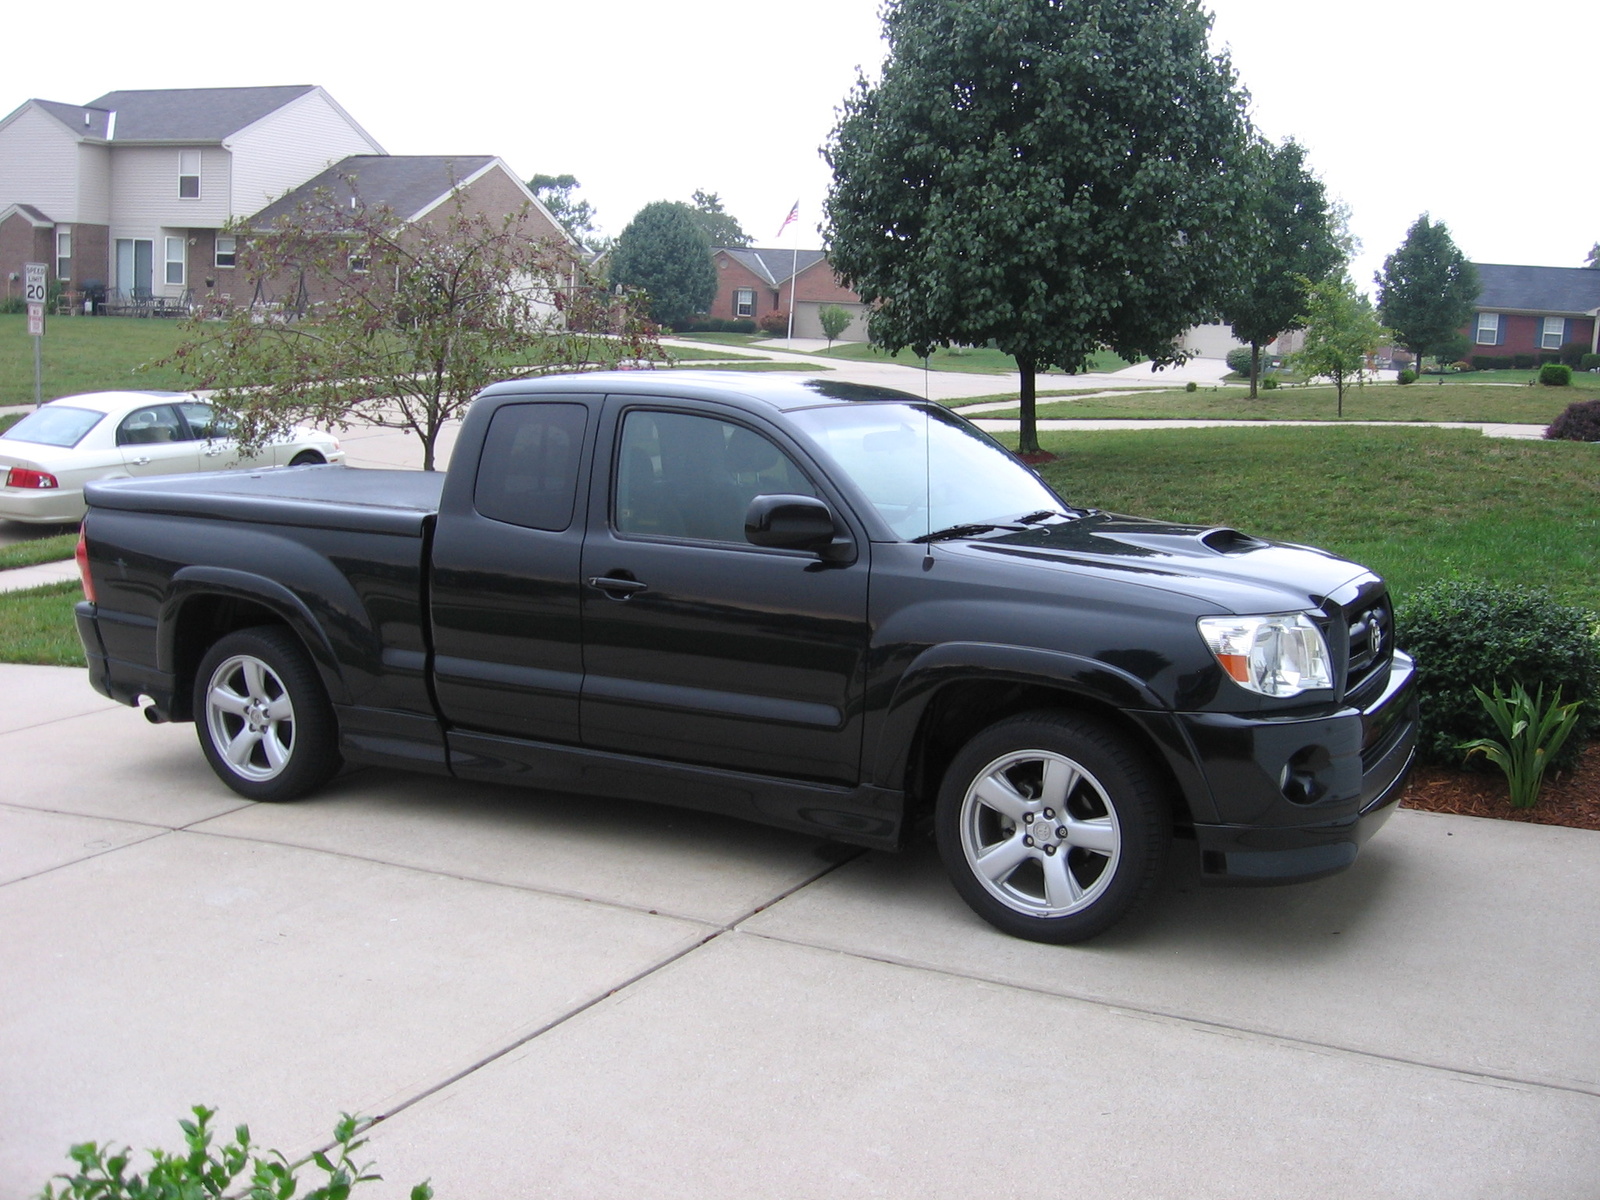 Toyota Tacoma Limited V6 Picture 13 Reviews News Specs Buy Car